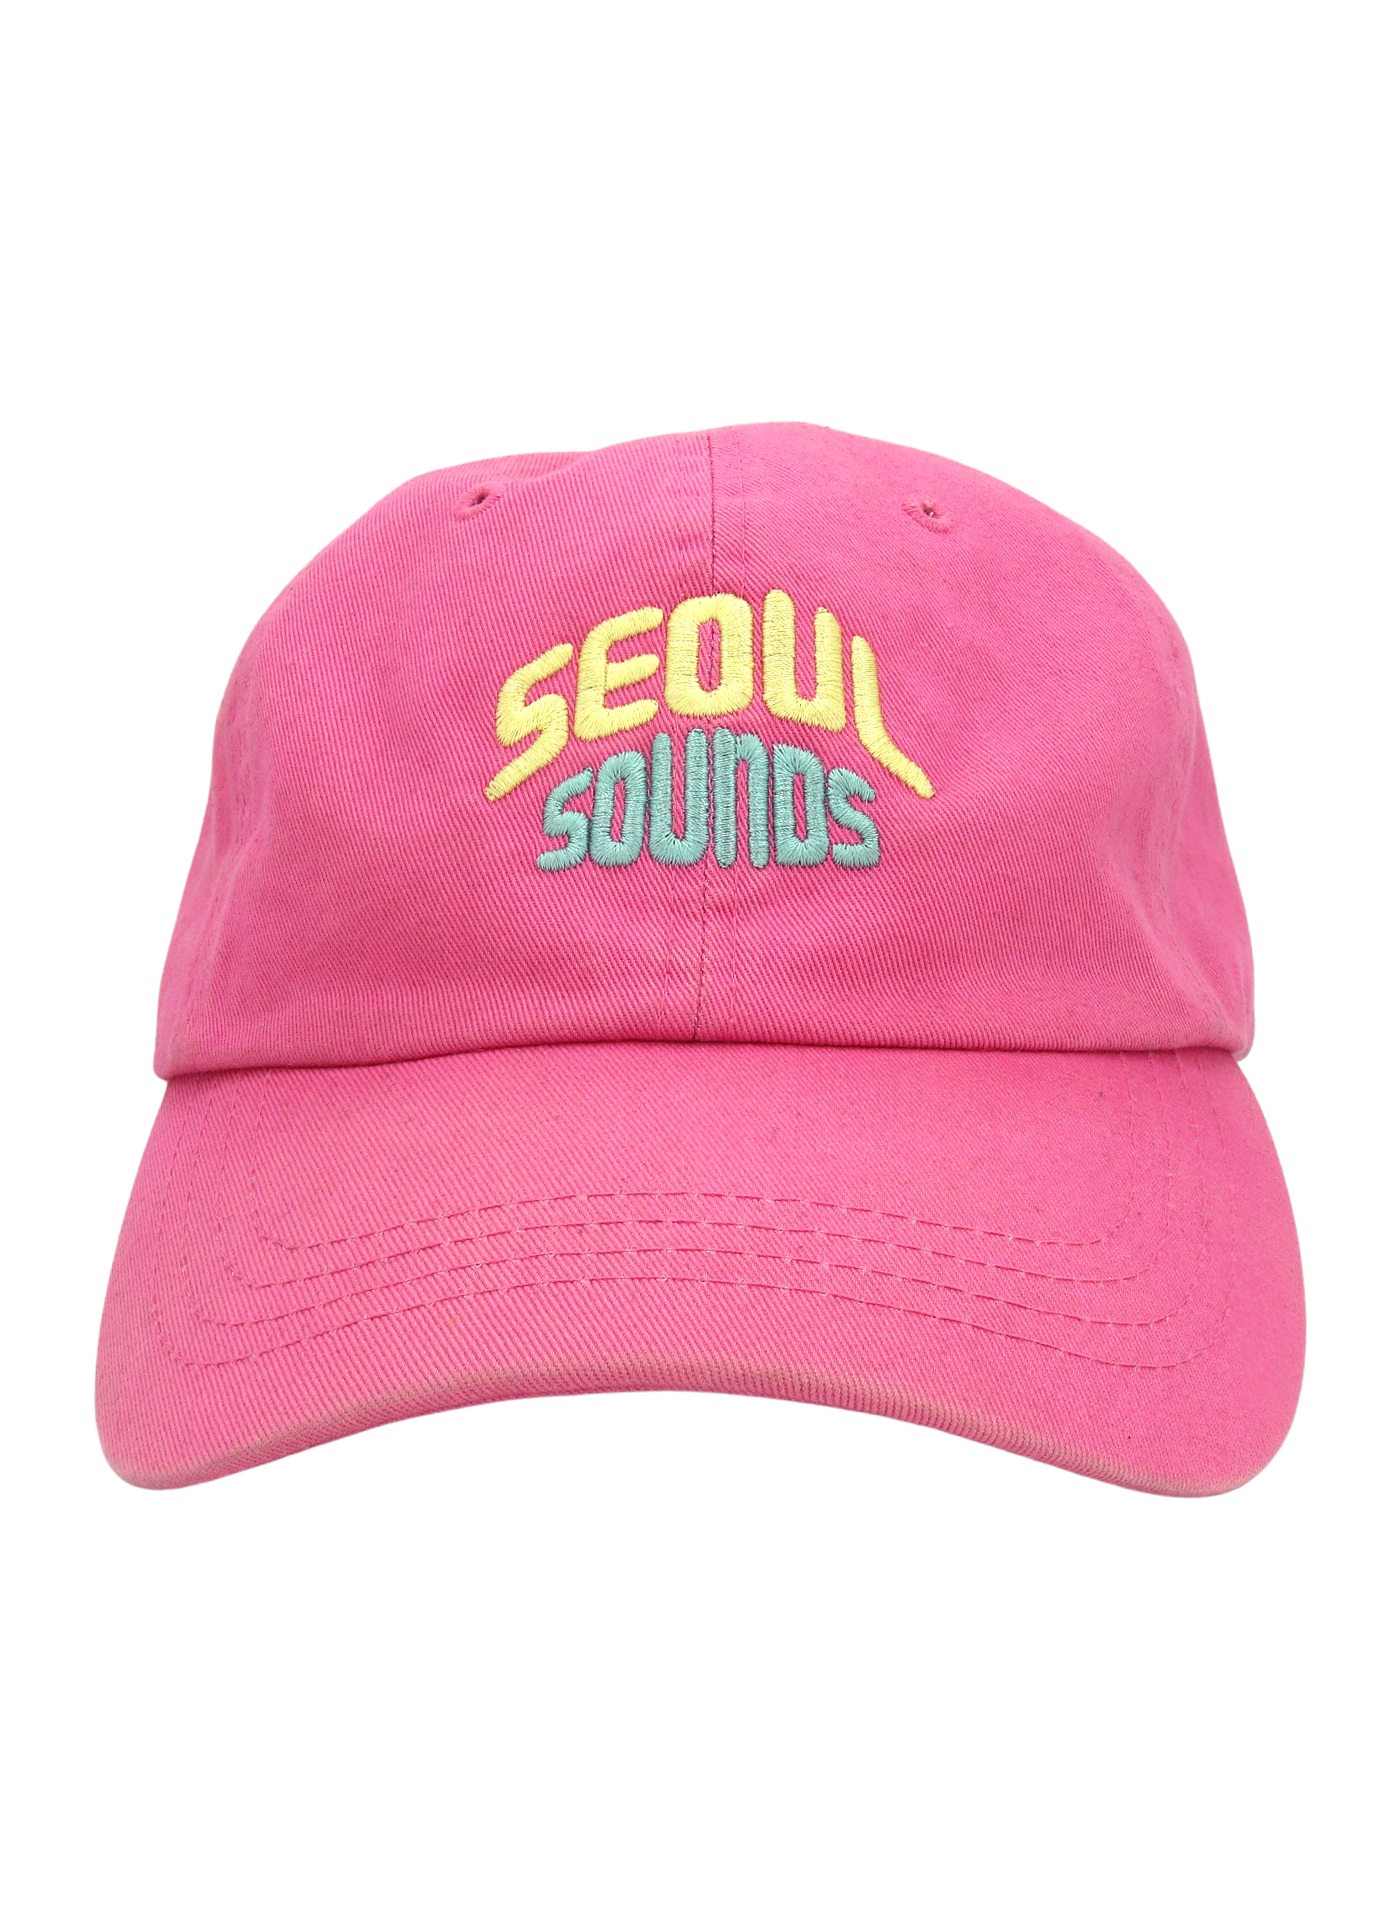 SEOUL SOUNDS Dad Hat Made By NAKD